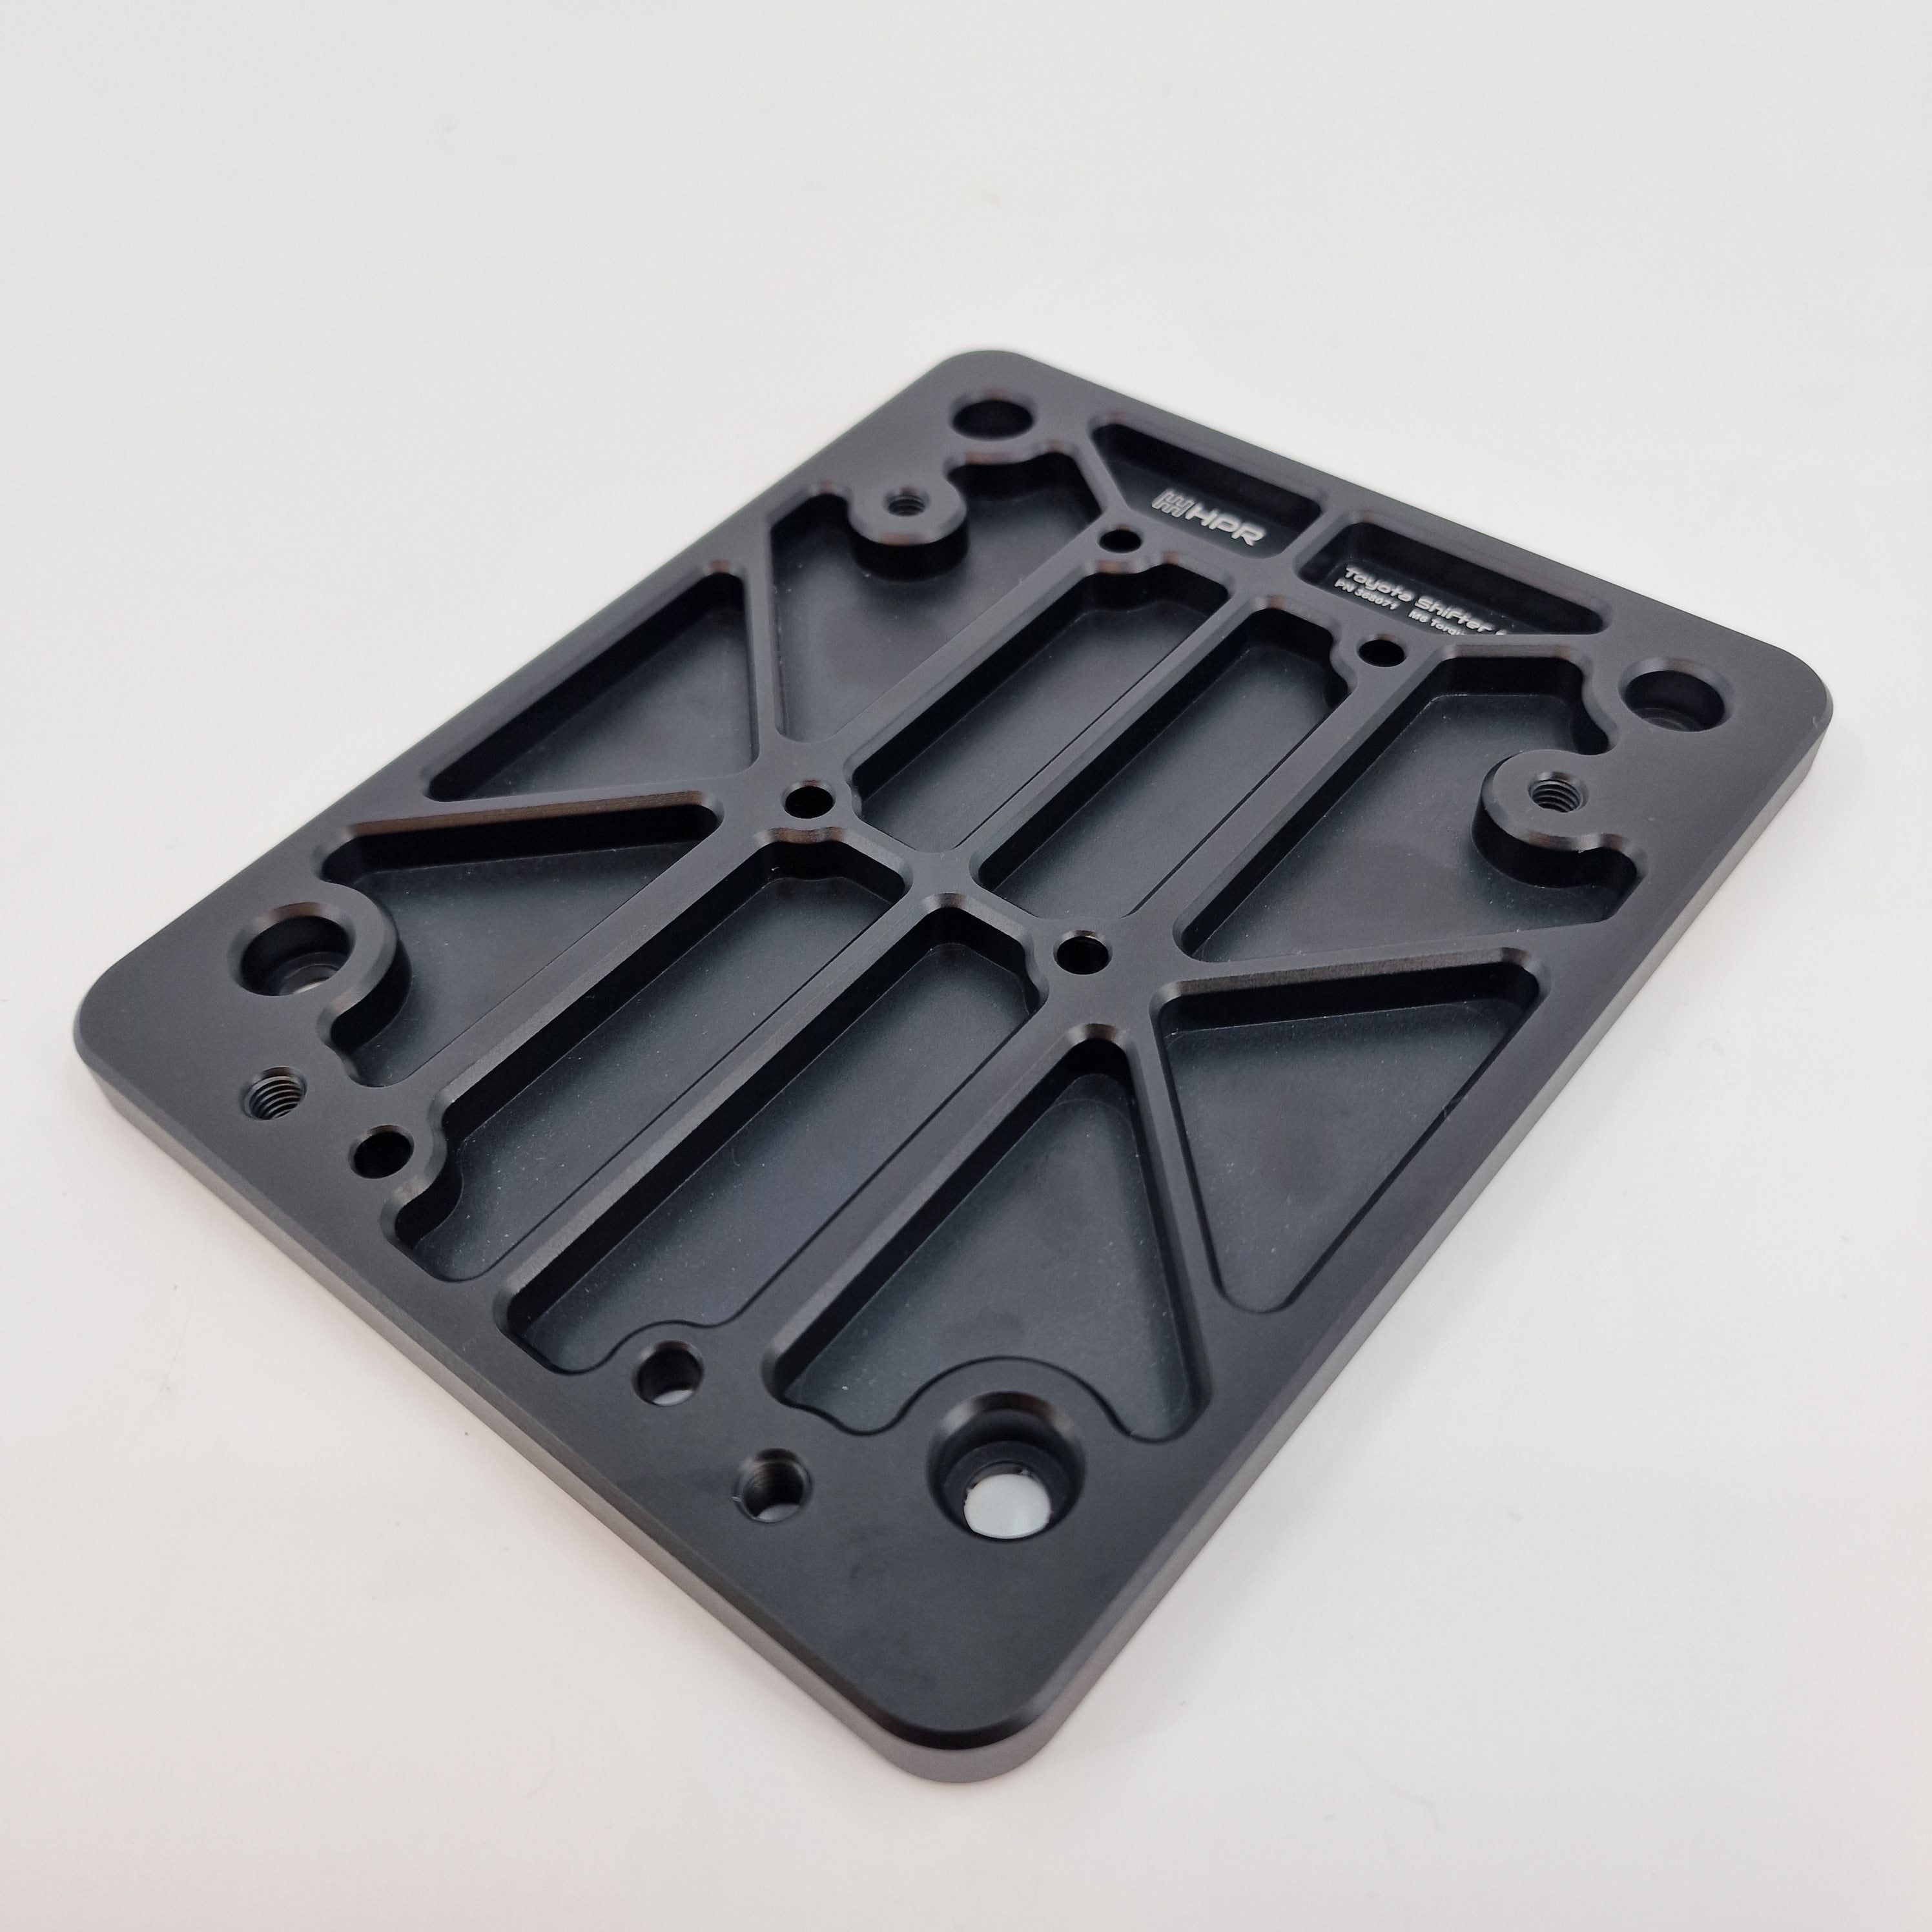 Toyota chassis shifter plate